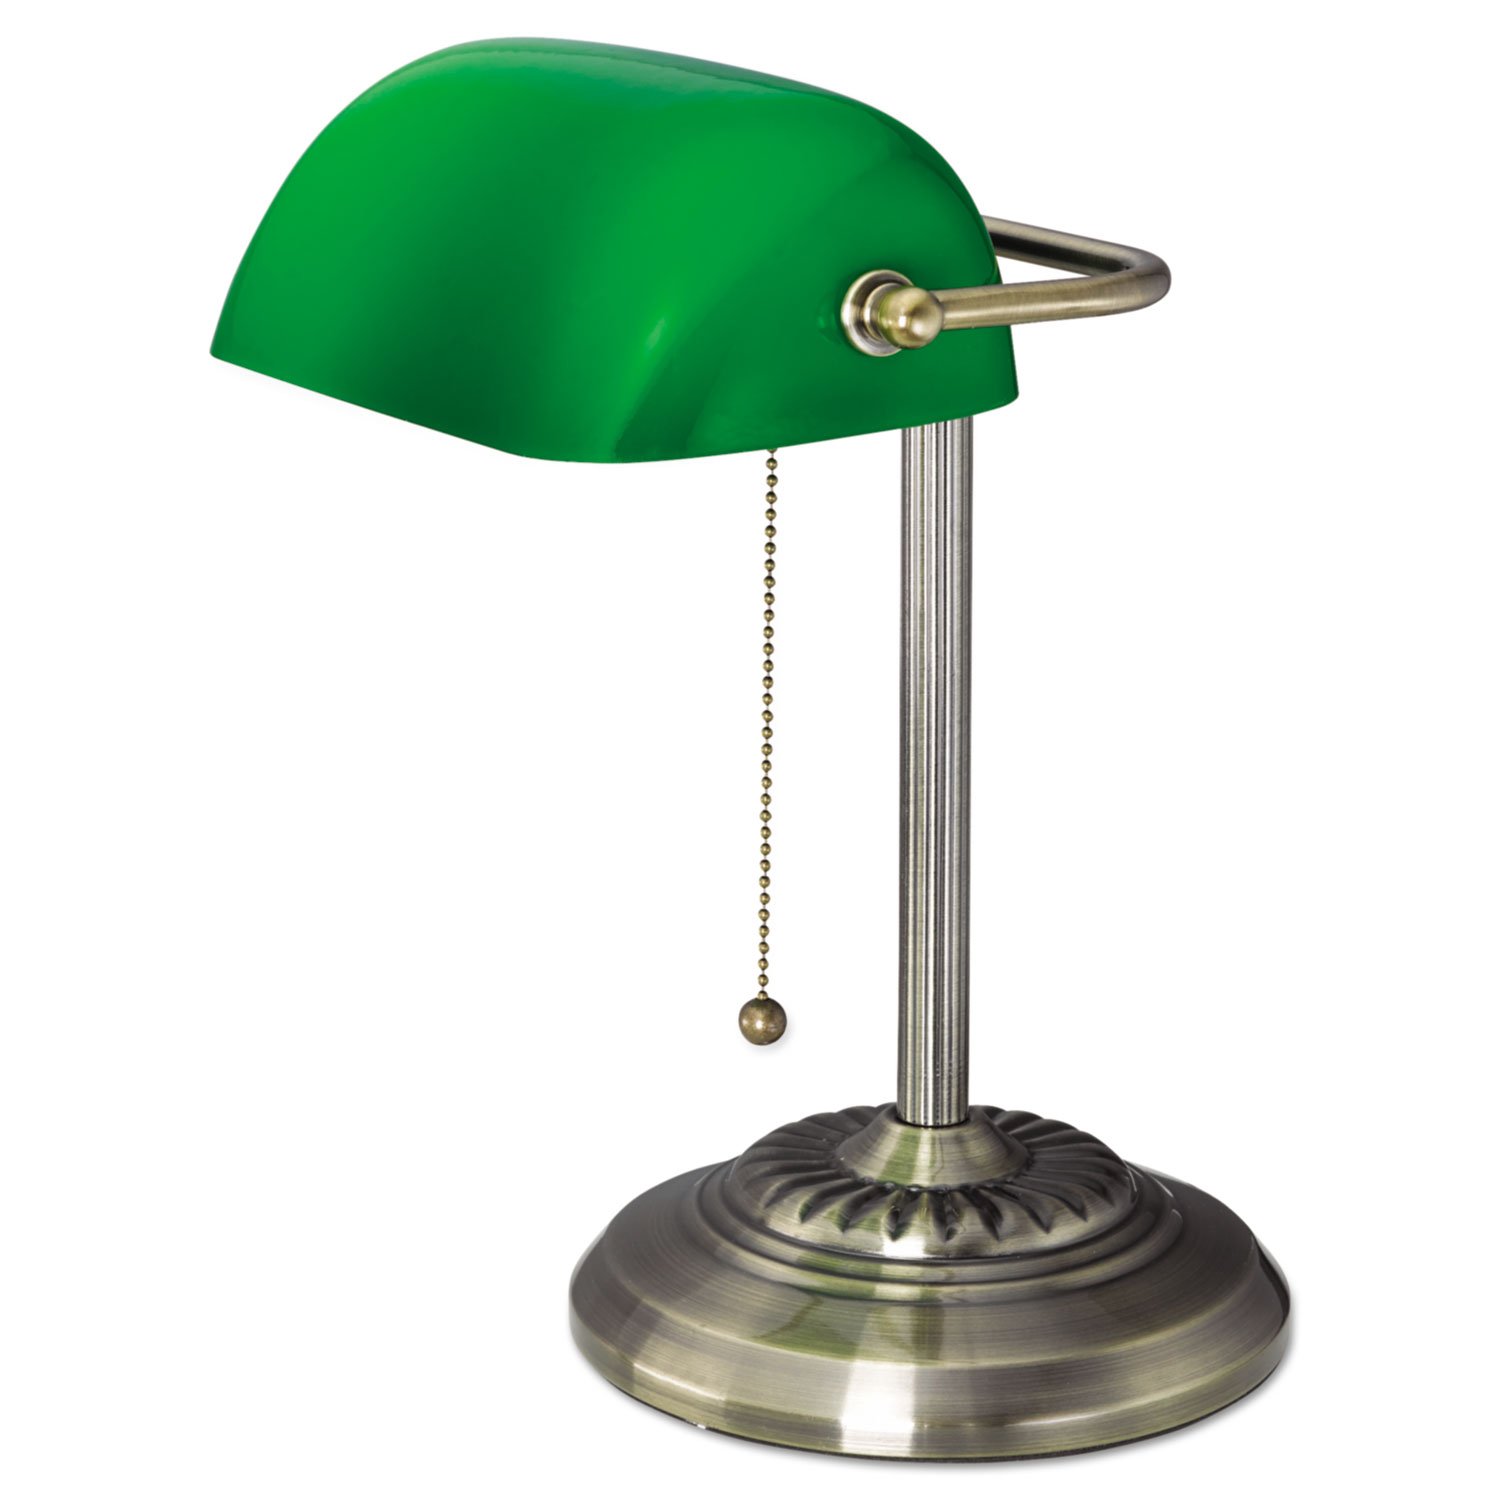 Traditional Banker's Lamp, Green Glass Shade, Antique Brass Base, 14